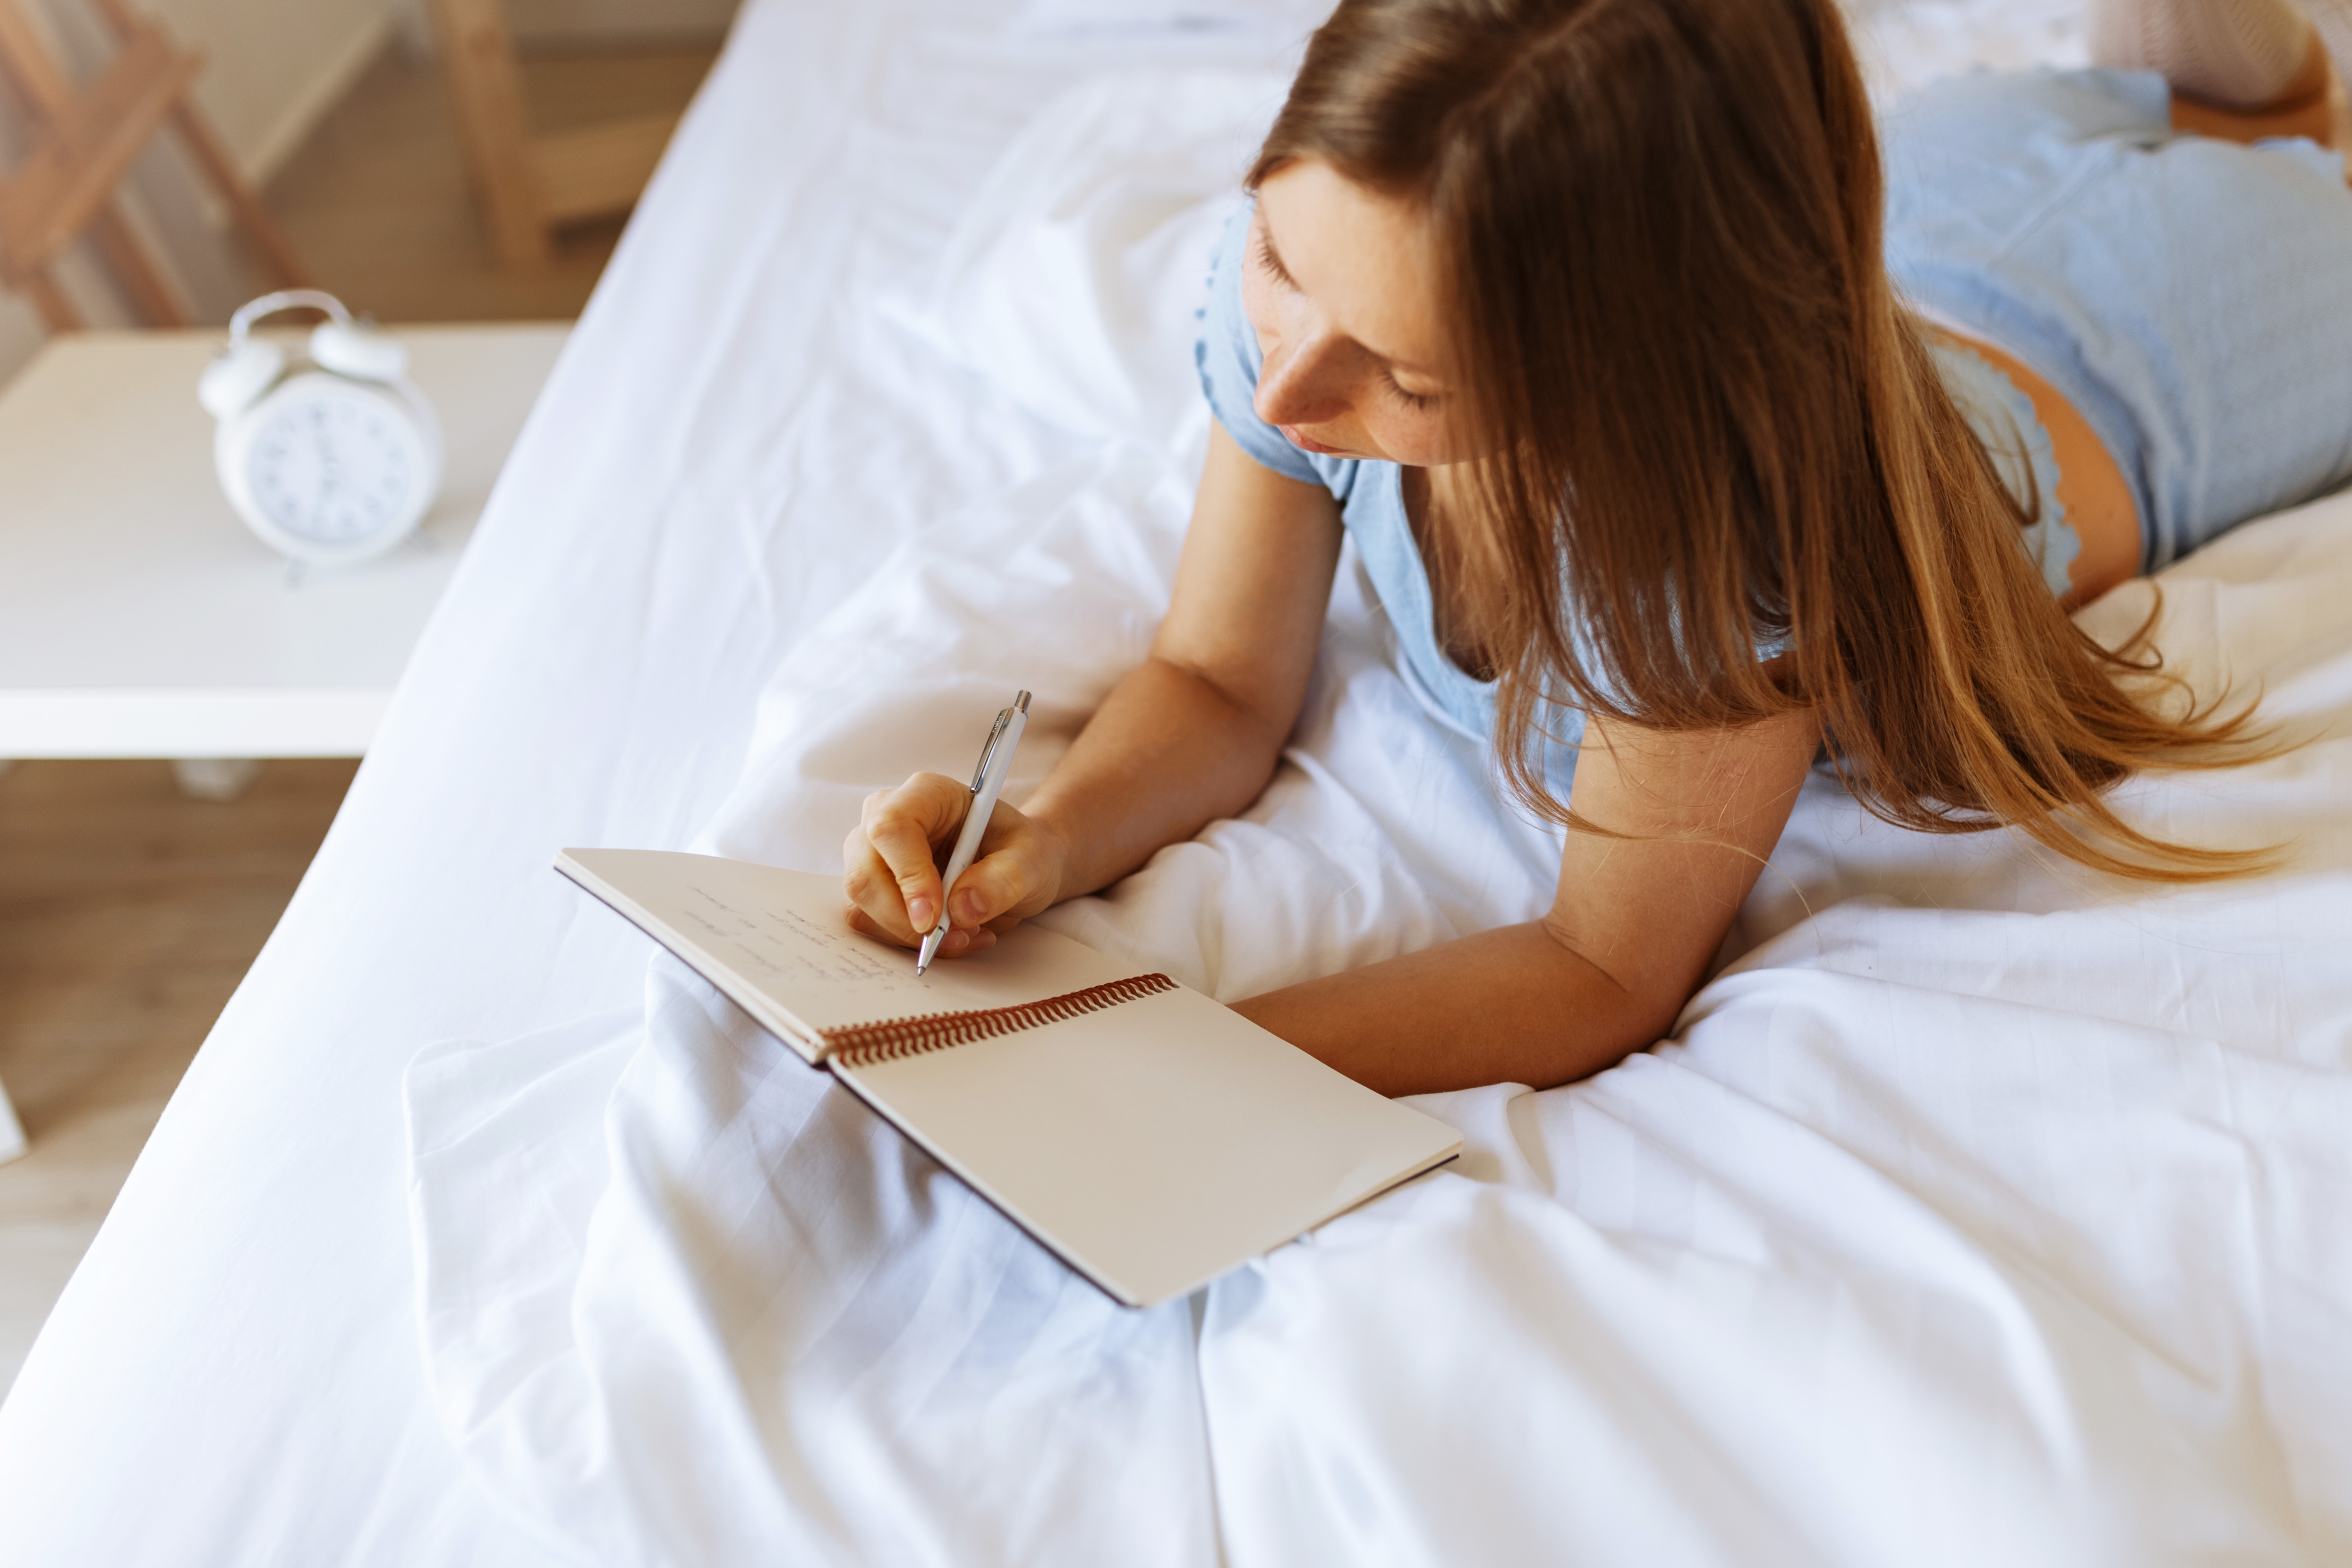 A woman lying on a bed writing in a notebook